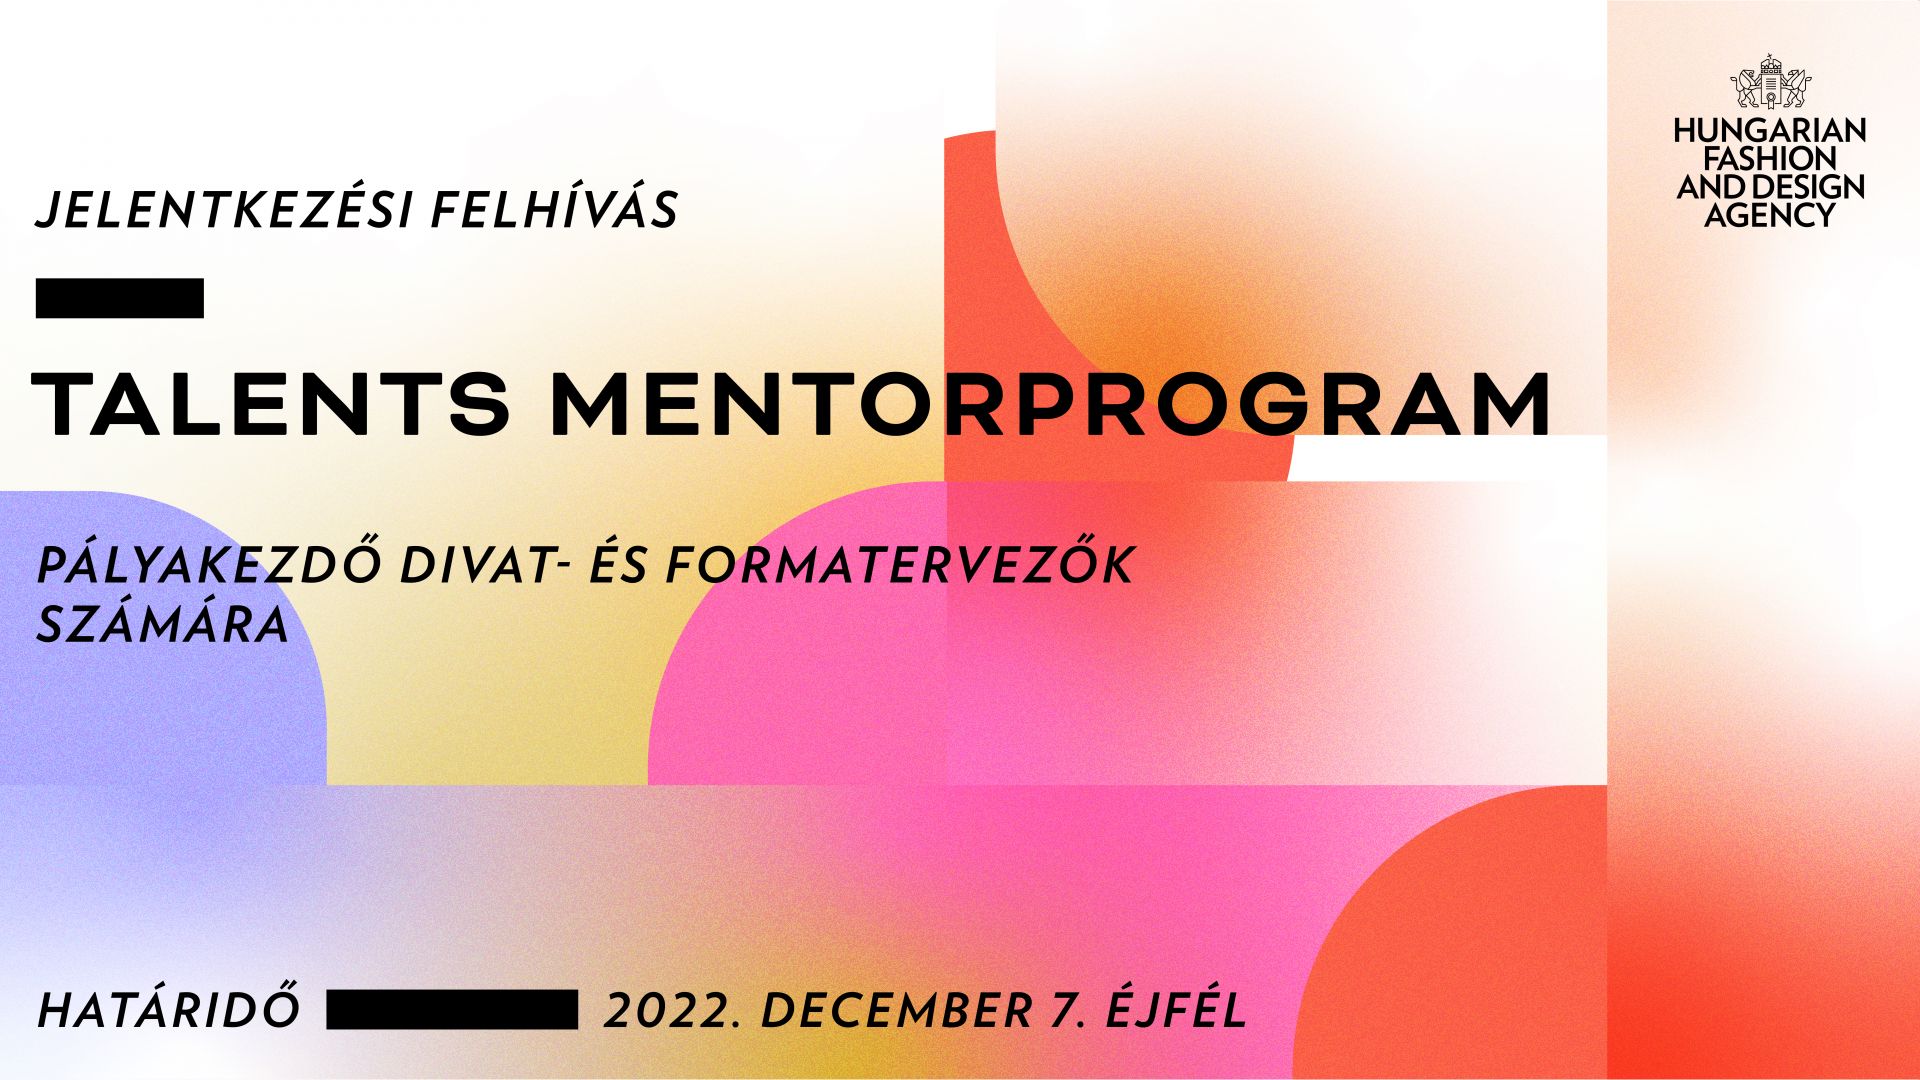 The Talents Mentoring Program kicks off – entry-level fashion and product designers can apply